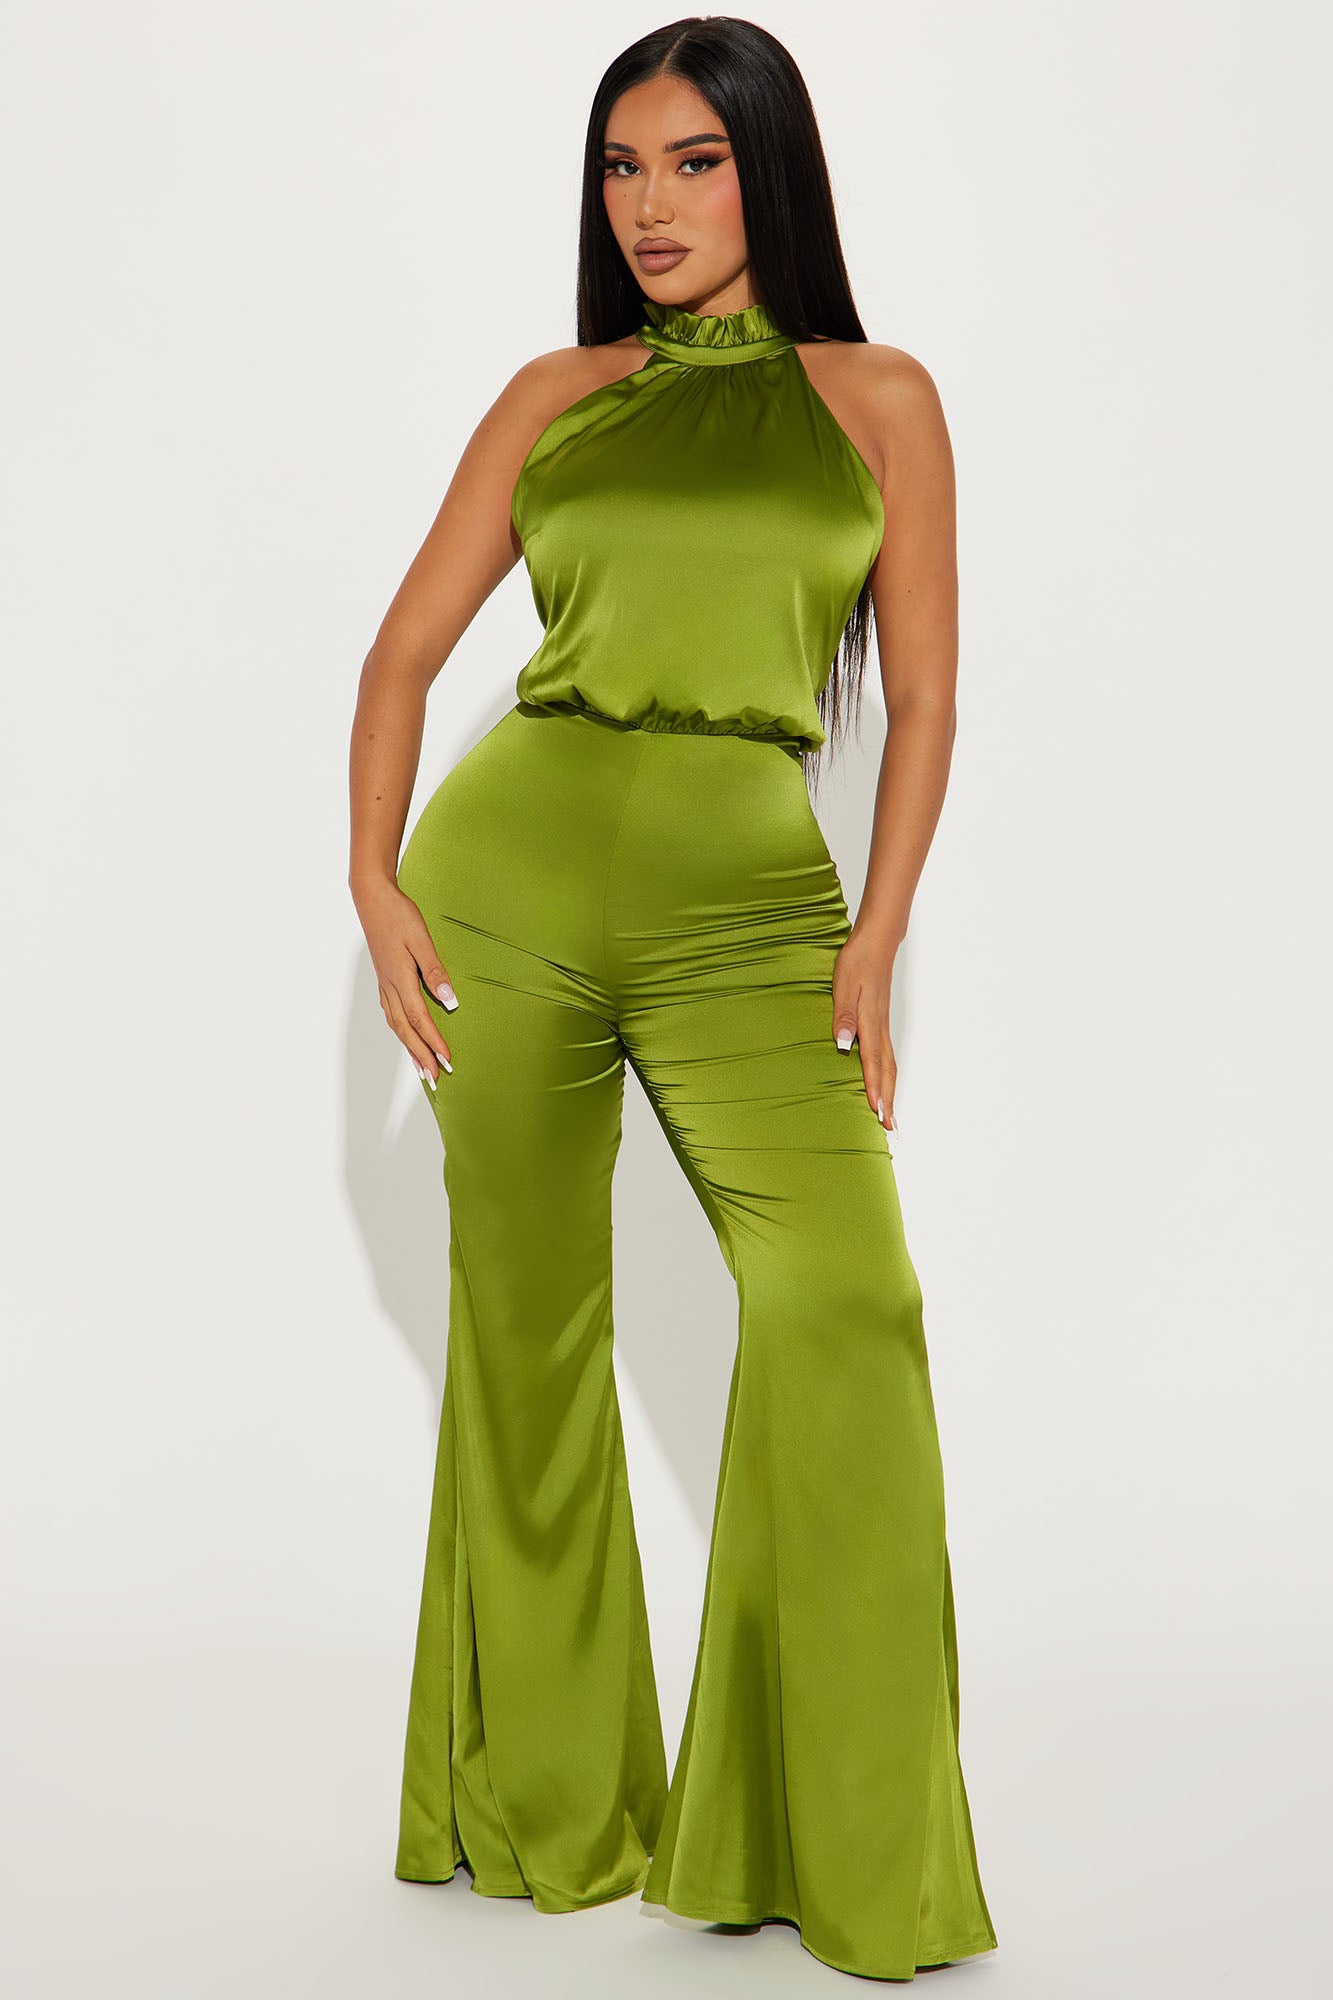 All I Ever Wanted Satin Jumpsuit - Chartreuse, Fashion Nova, Jumpsuits